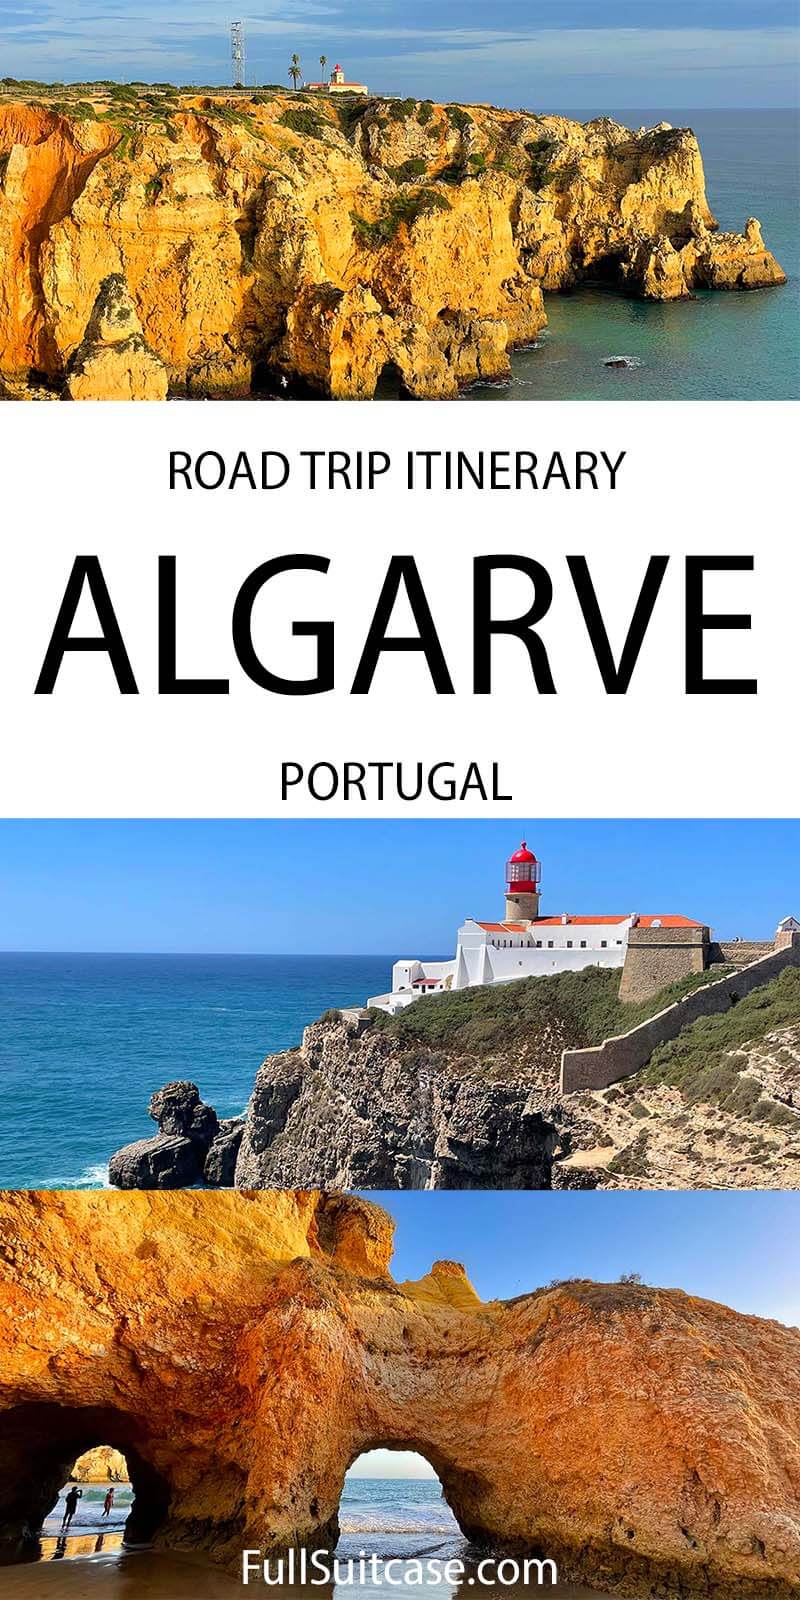 Algarve itinerary for 5 days road trip